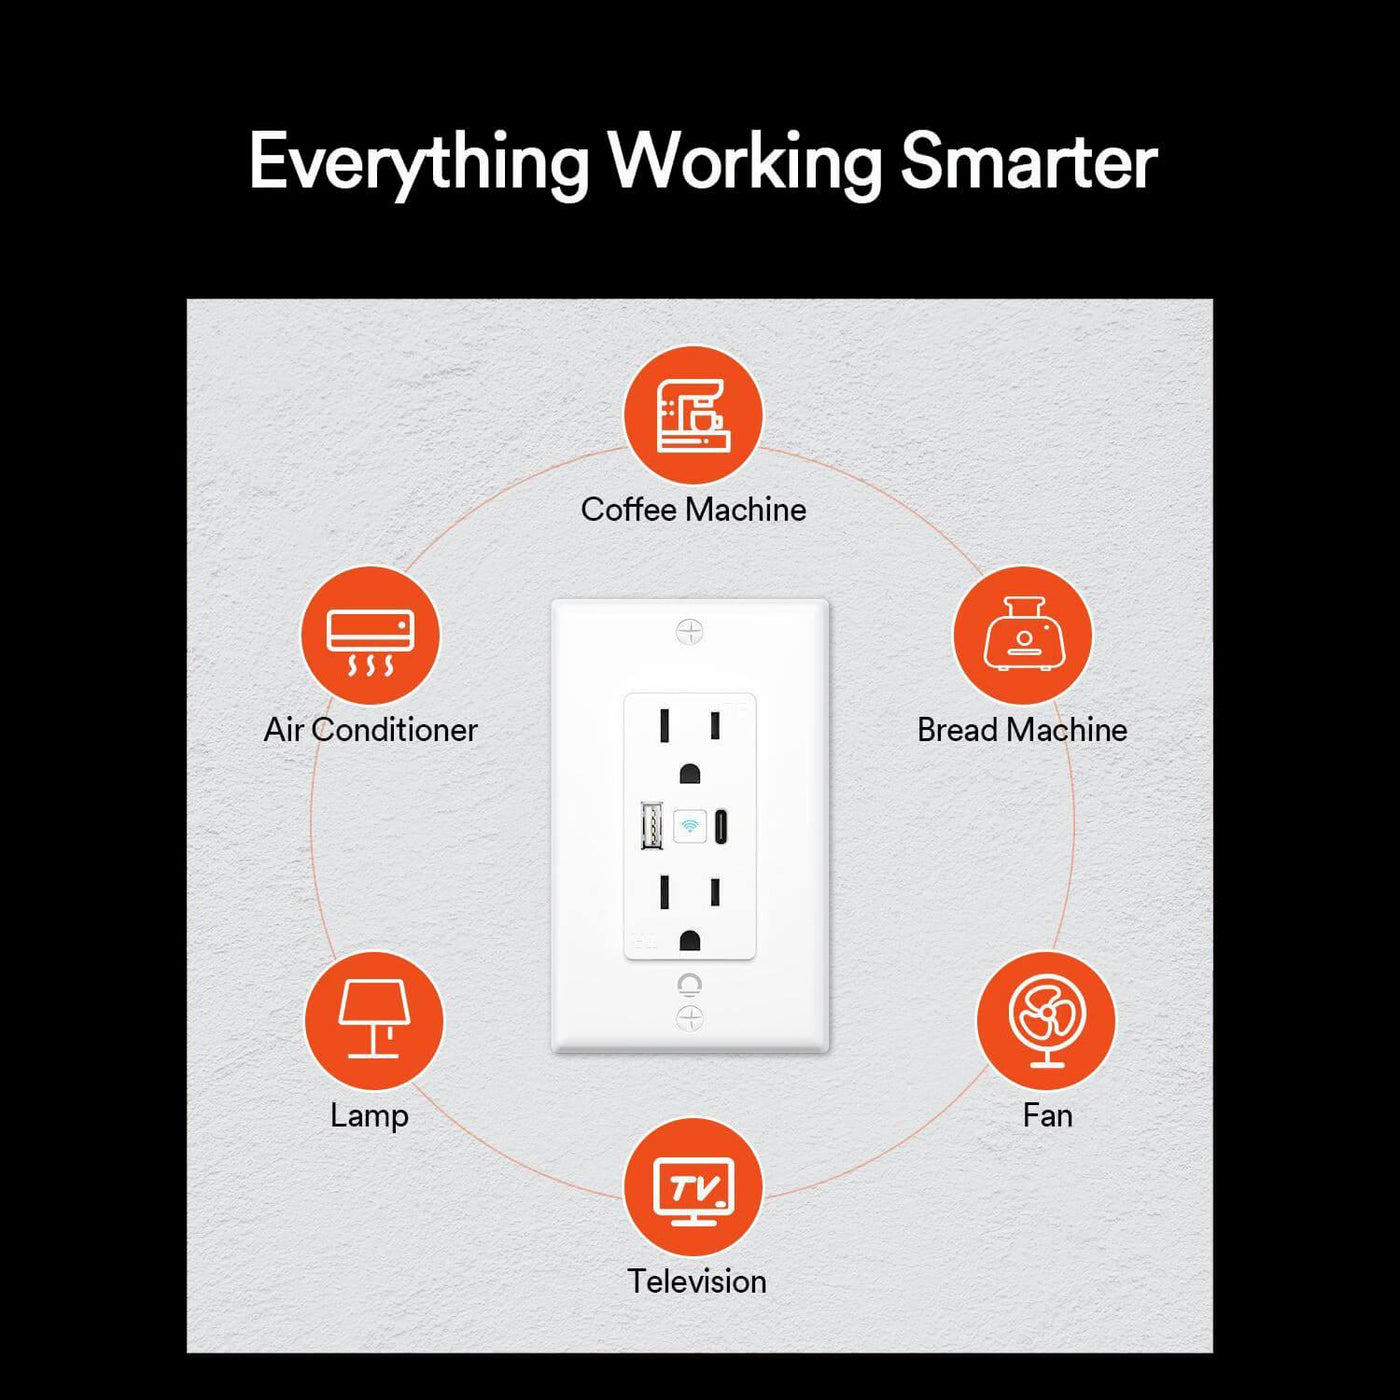 Lumary Smart Outlet USB with Type A and Type C Port in Wall Wi-Fi Socket 4 PCS - Lumary